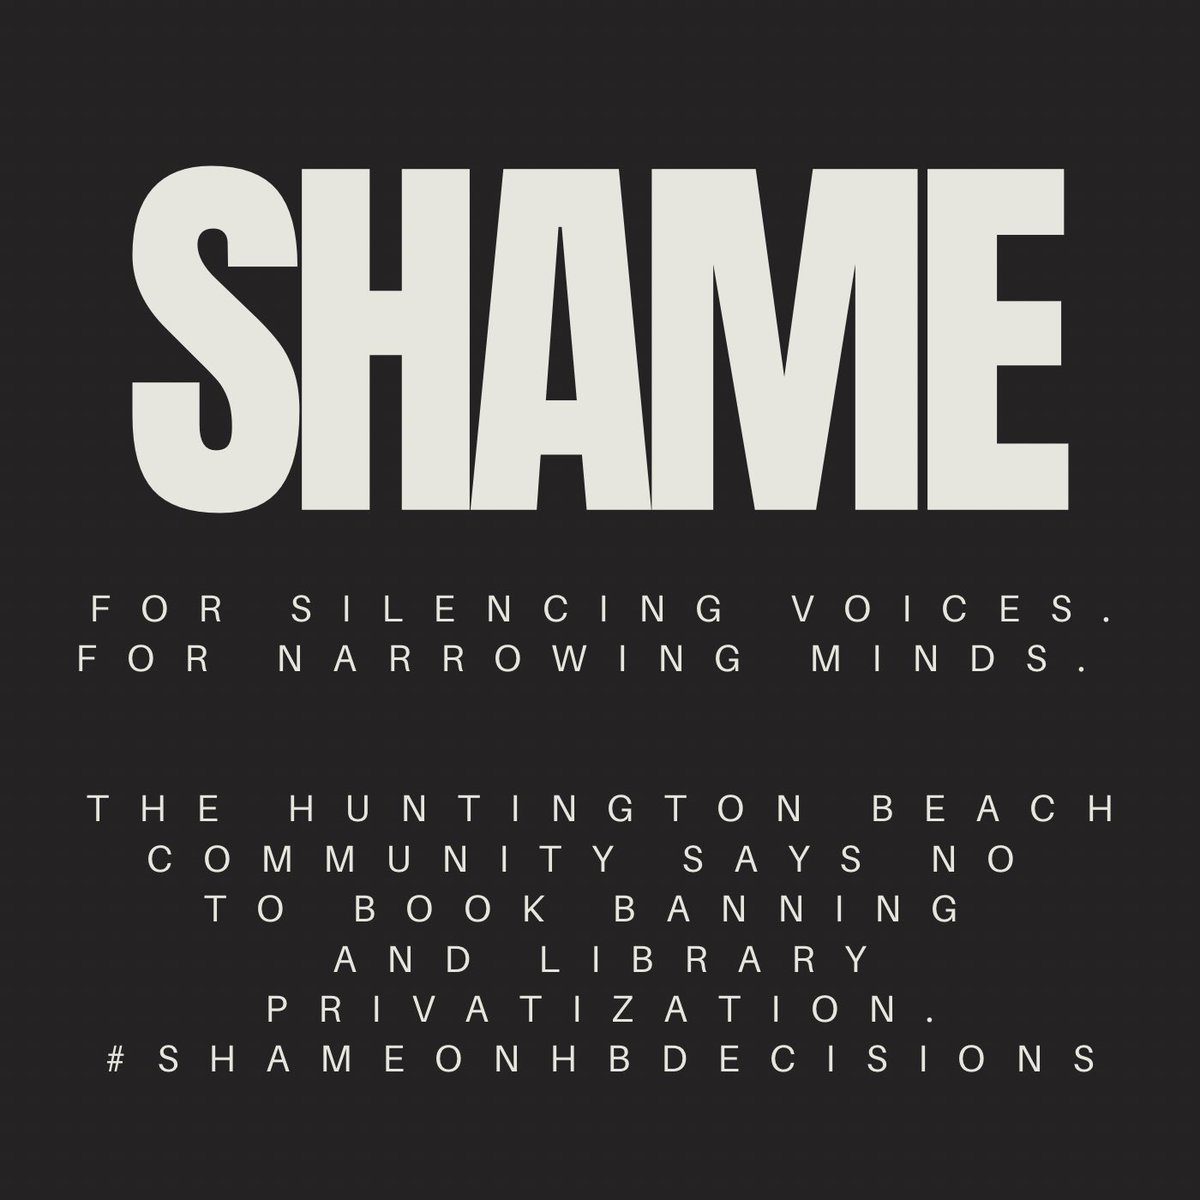 Silence is not an option. 🚫📚 #ShameOnHBDecisions Stand against censorship and library privatization. Your voice matters. ✊ #SaveHBLibraries #ProtectHBLibraries #StandWithHBLibraries #KeepHBLibrariesPublic #DefendHBLibraries